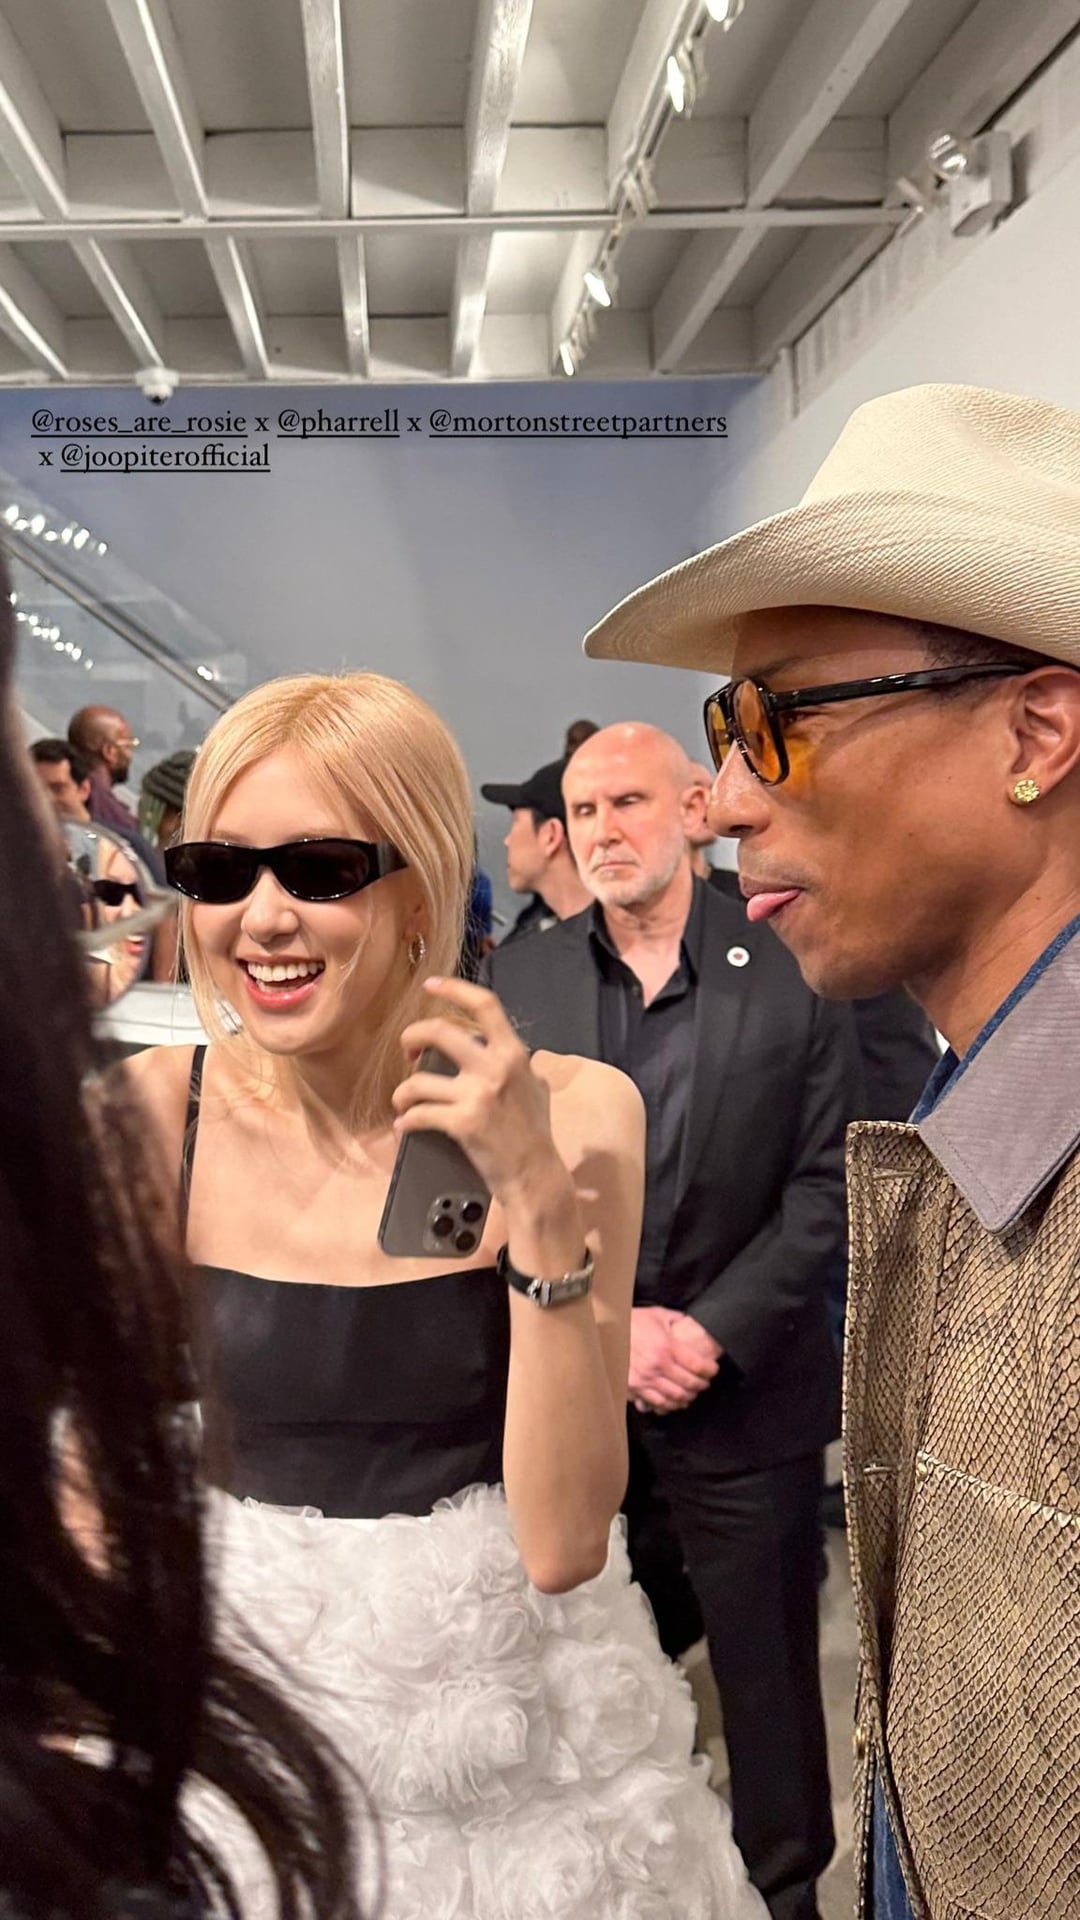 Rosé @ Joopiter Joyride Auction (Founded by Pharell Williams) in New York